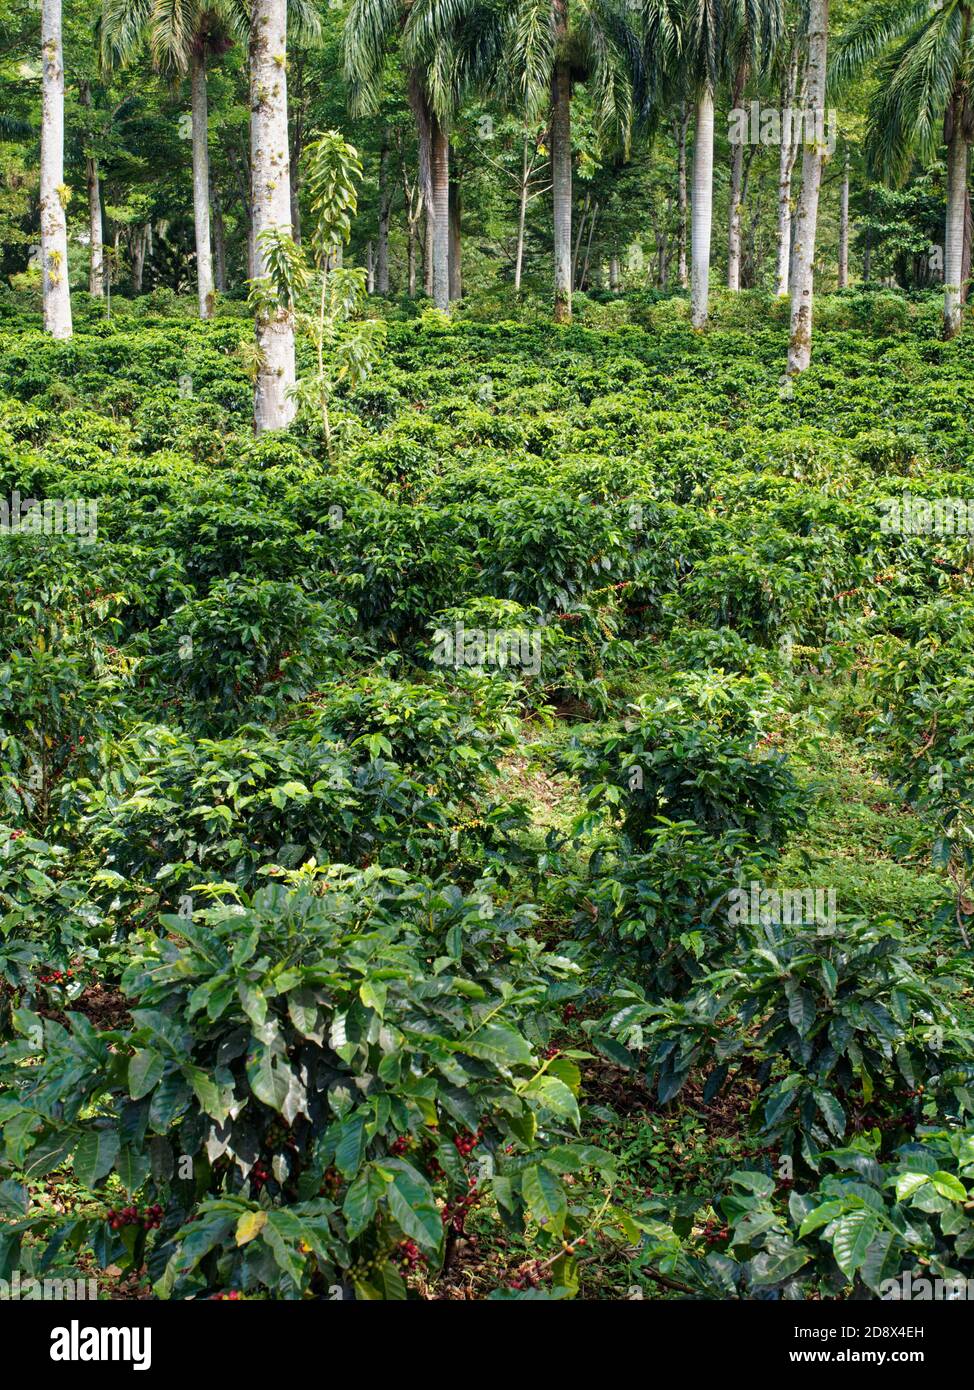 Costa Rica Coffea plantations. Coffea is a genus of flowering plants in the family Rubiaceae. Coffea species are shrubs or small trees native to tropi Stock Photo